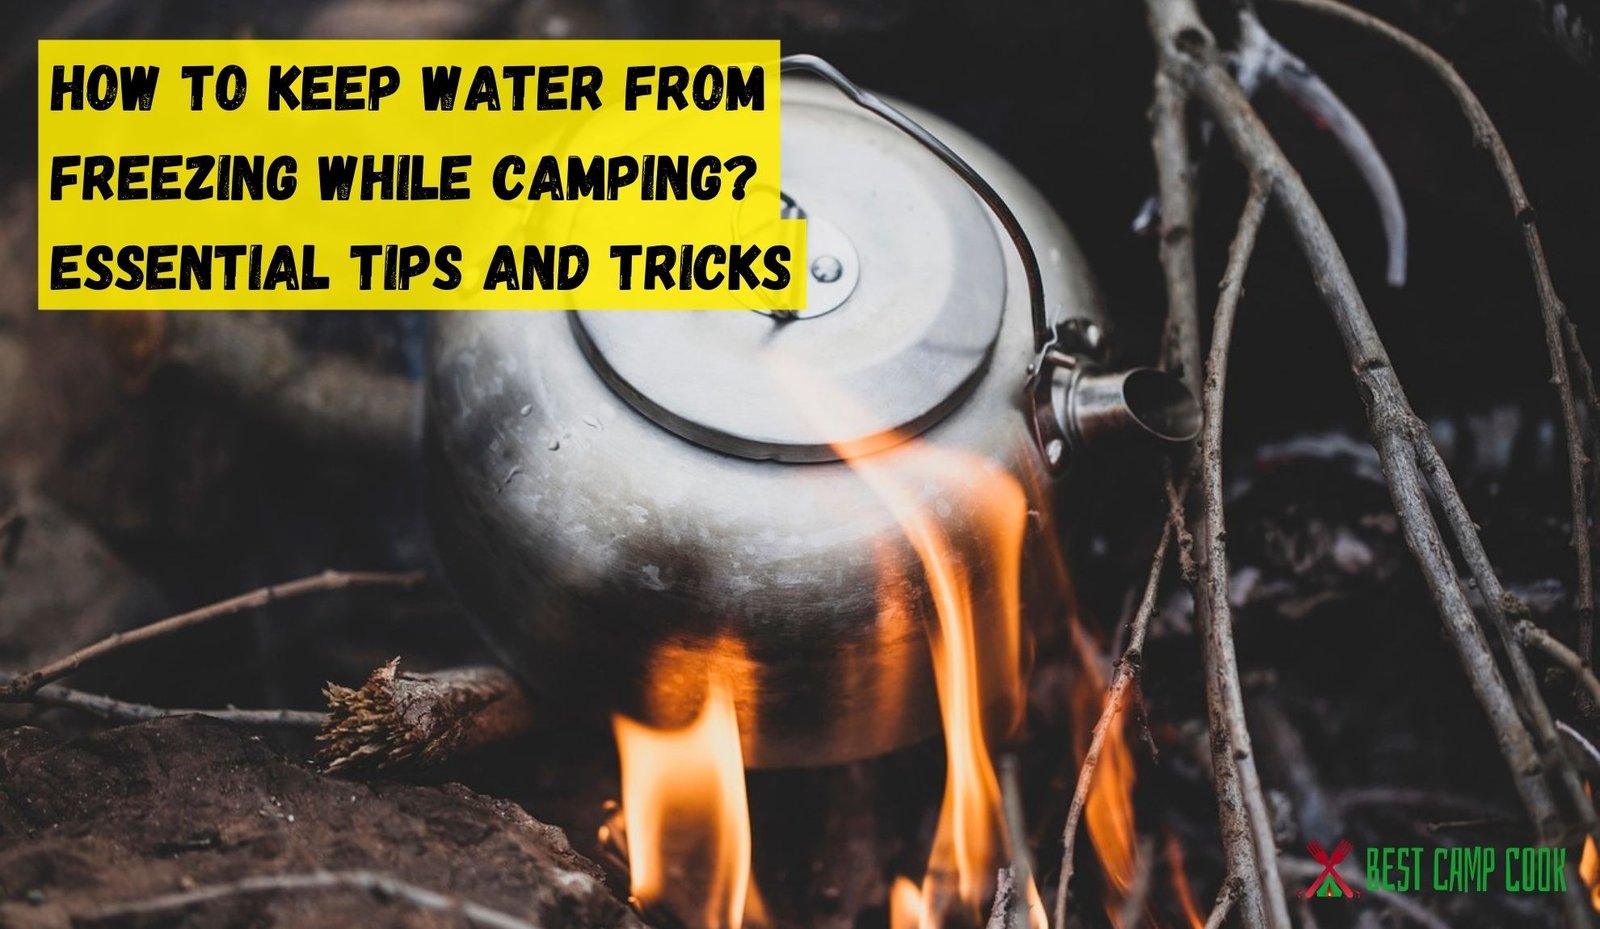 How to Keep Water from Freezing While Camping